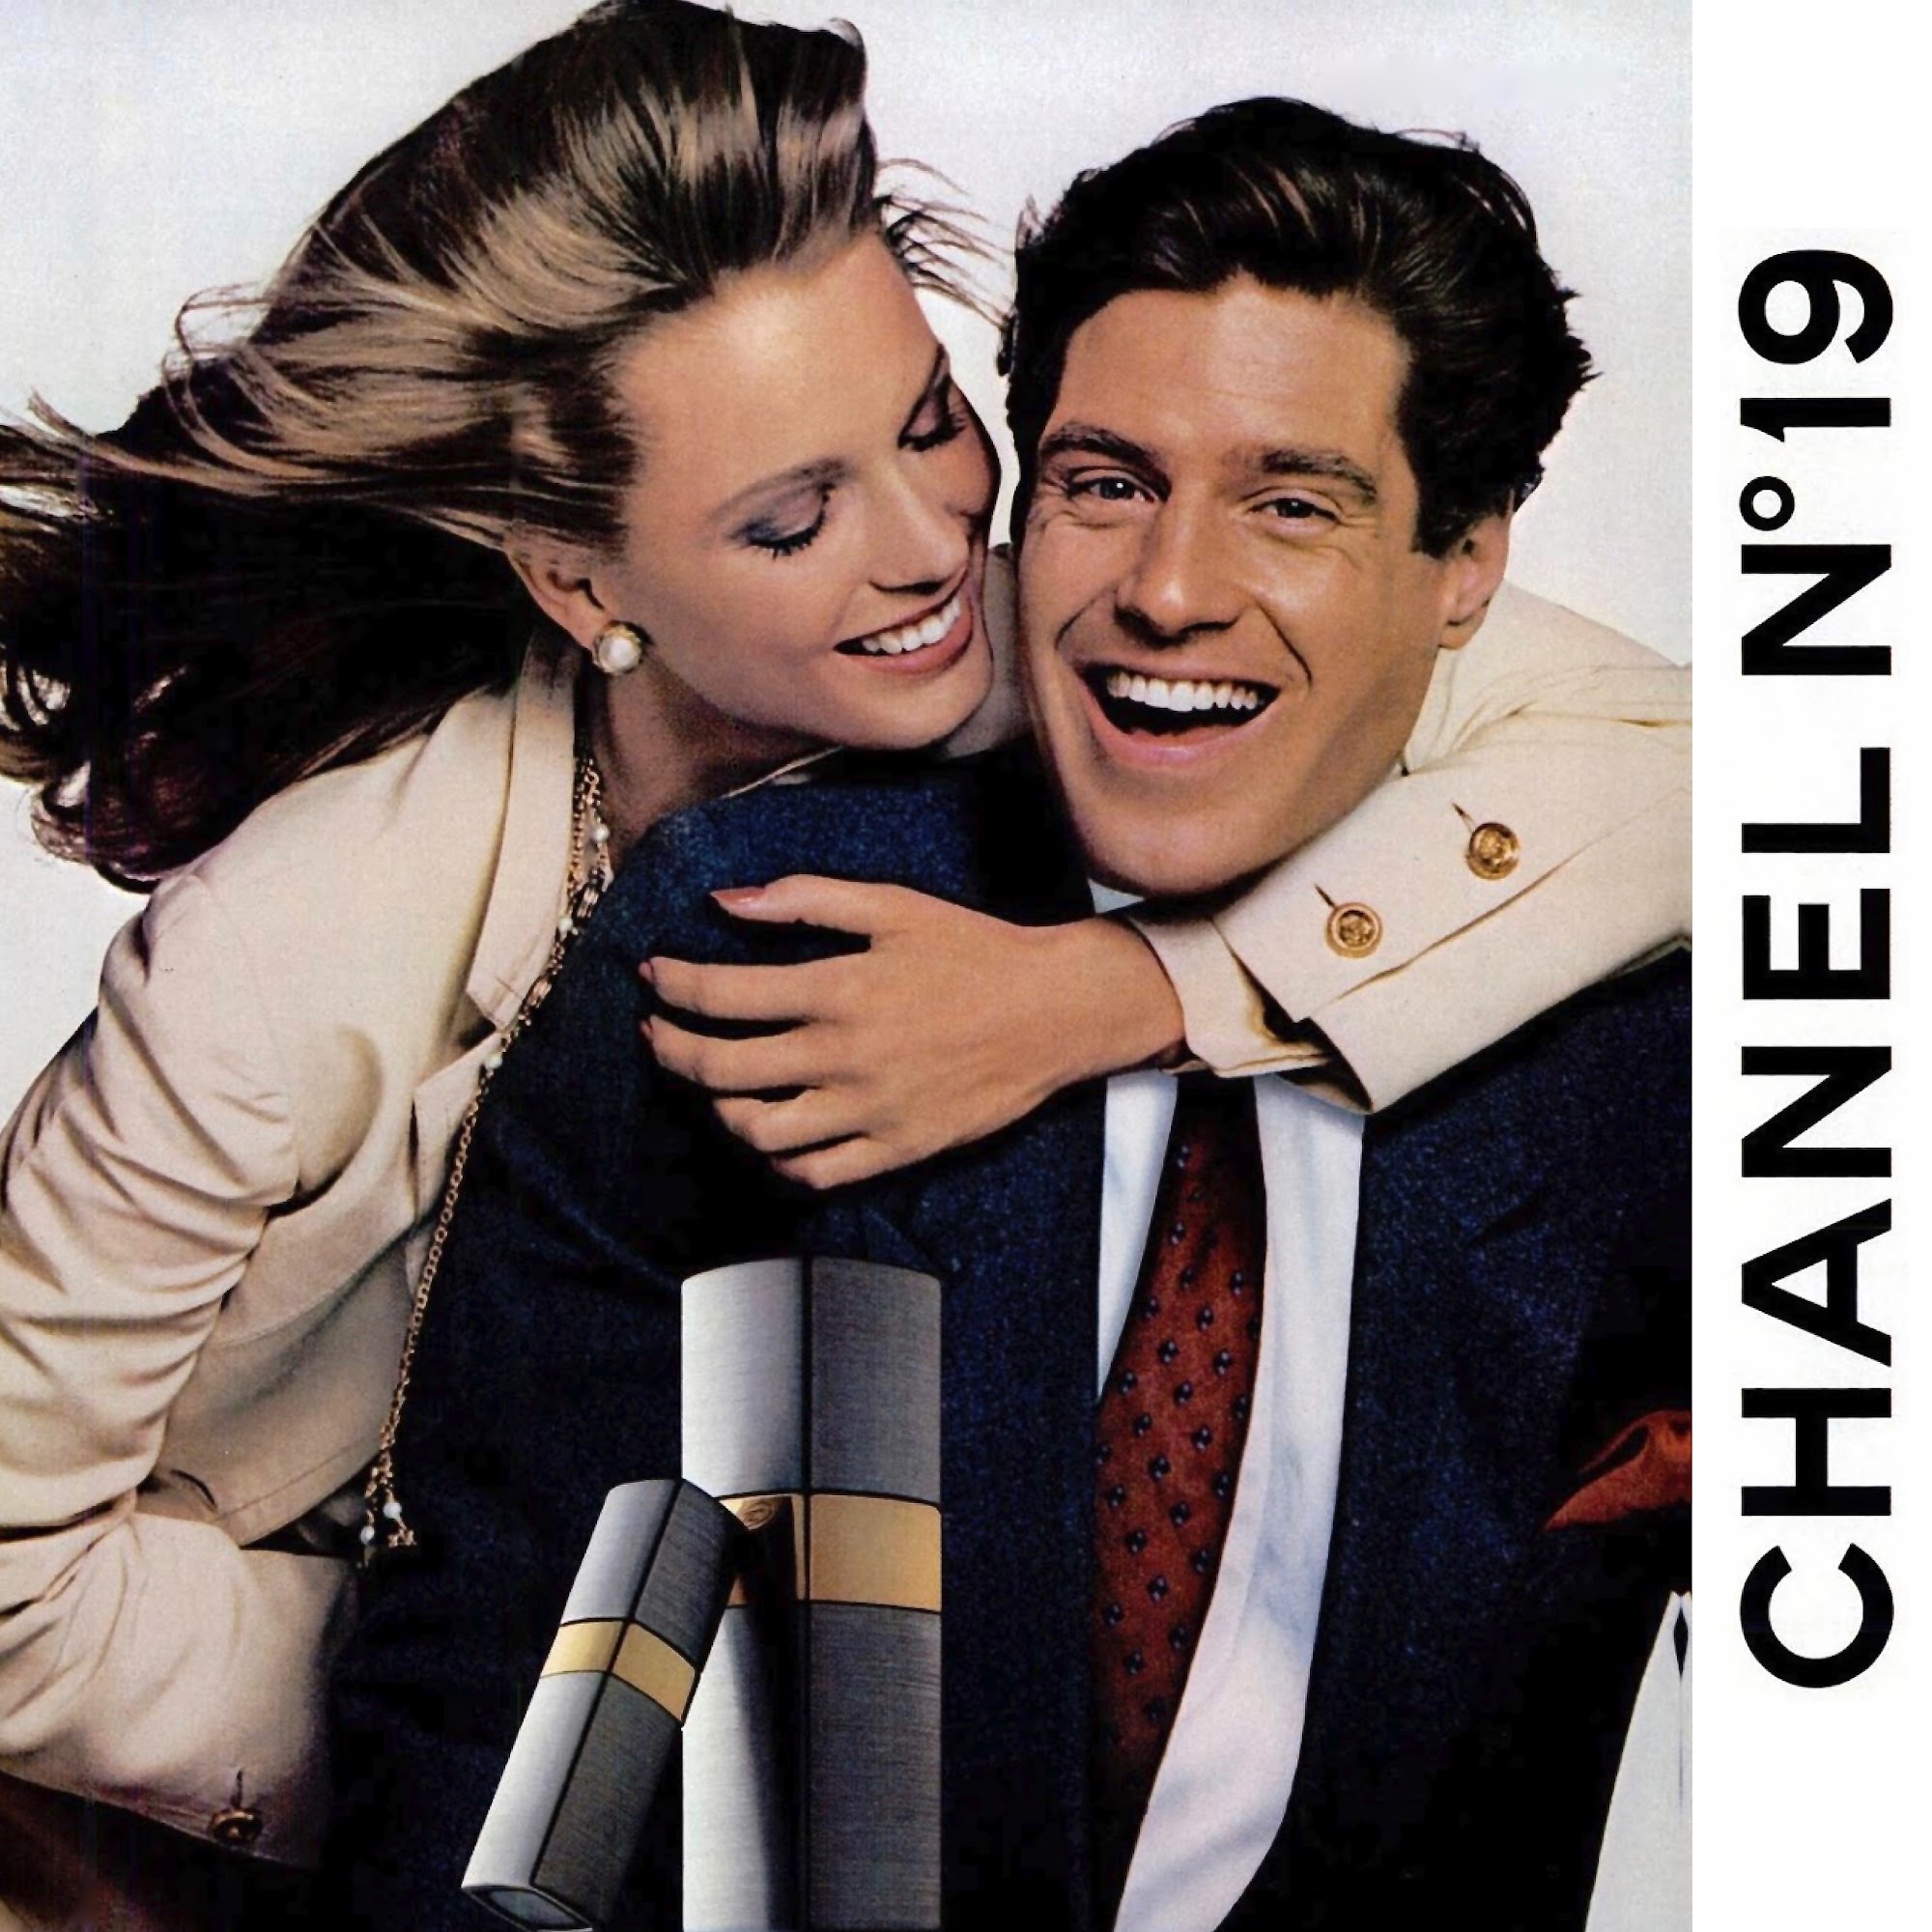 Advert for Chanel No.19 perfume